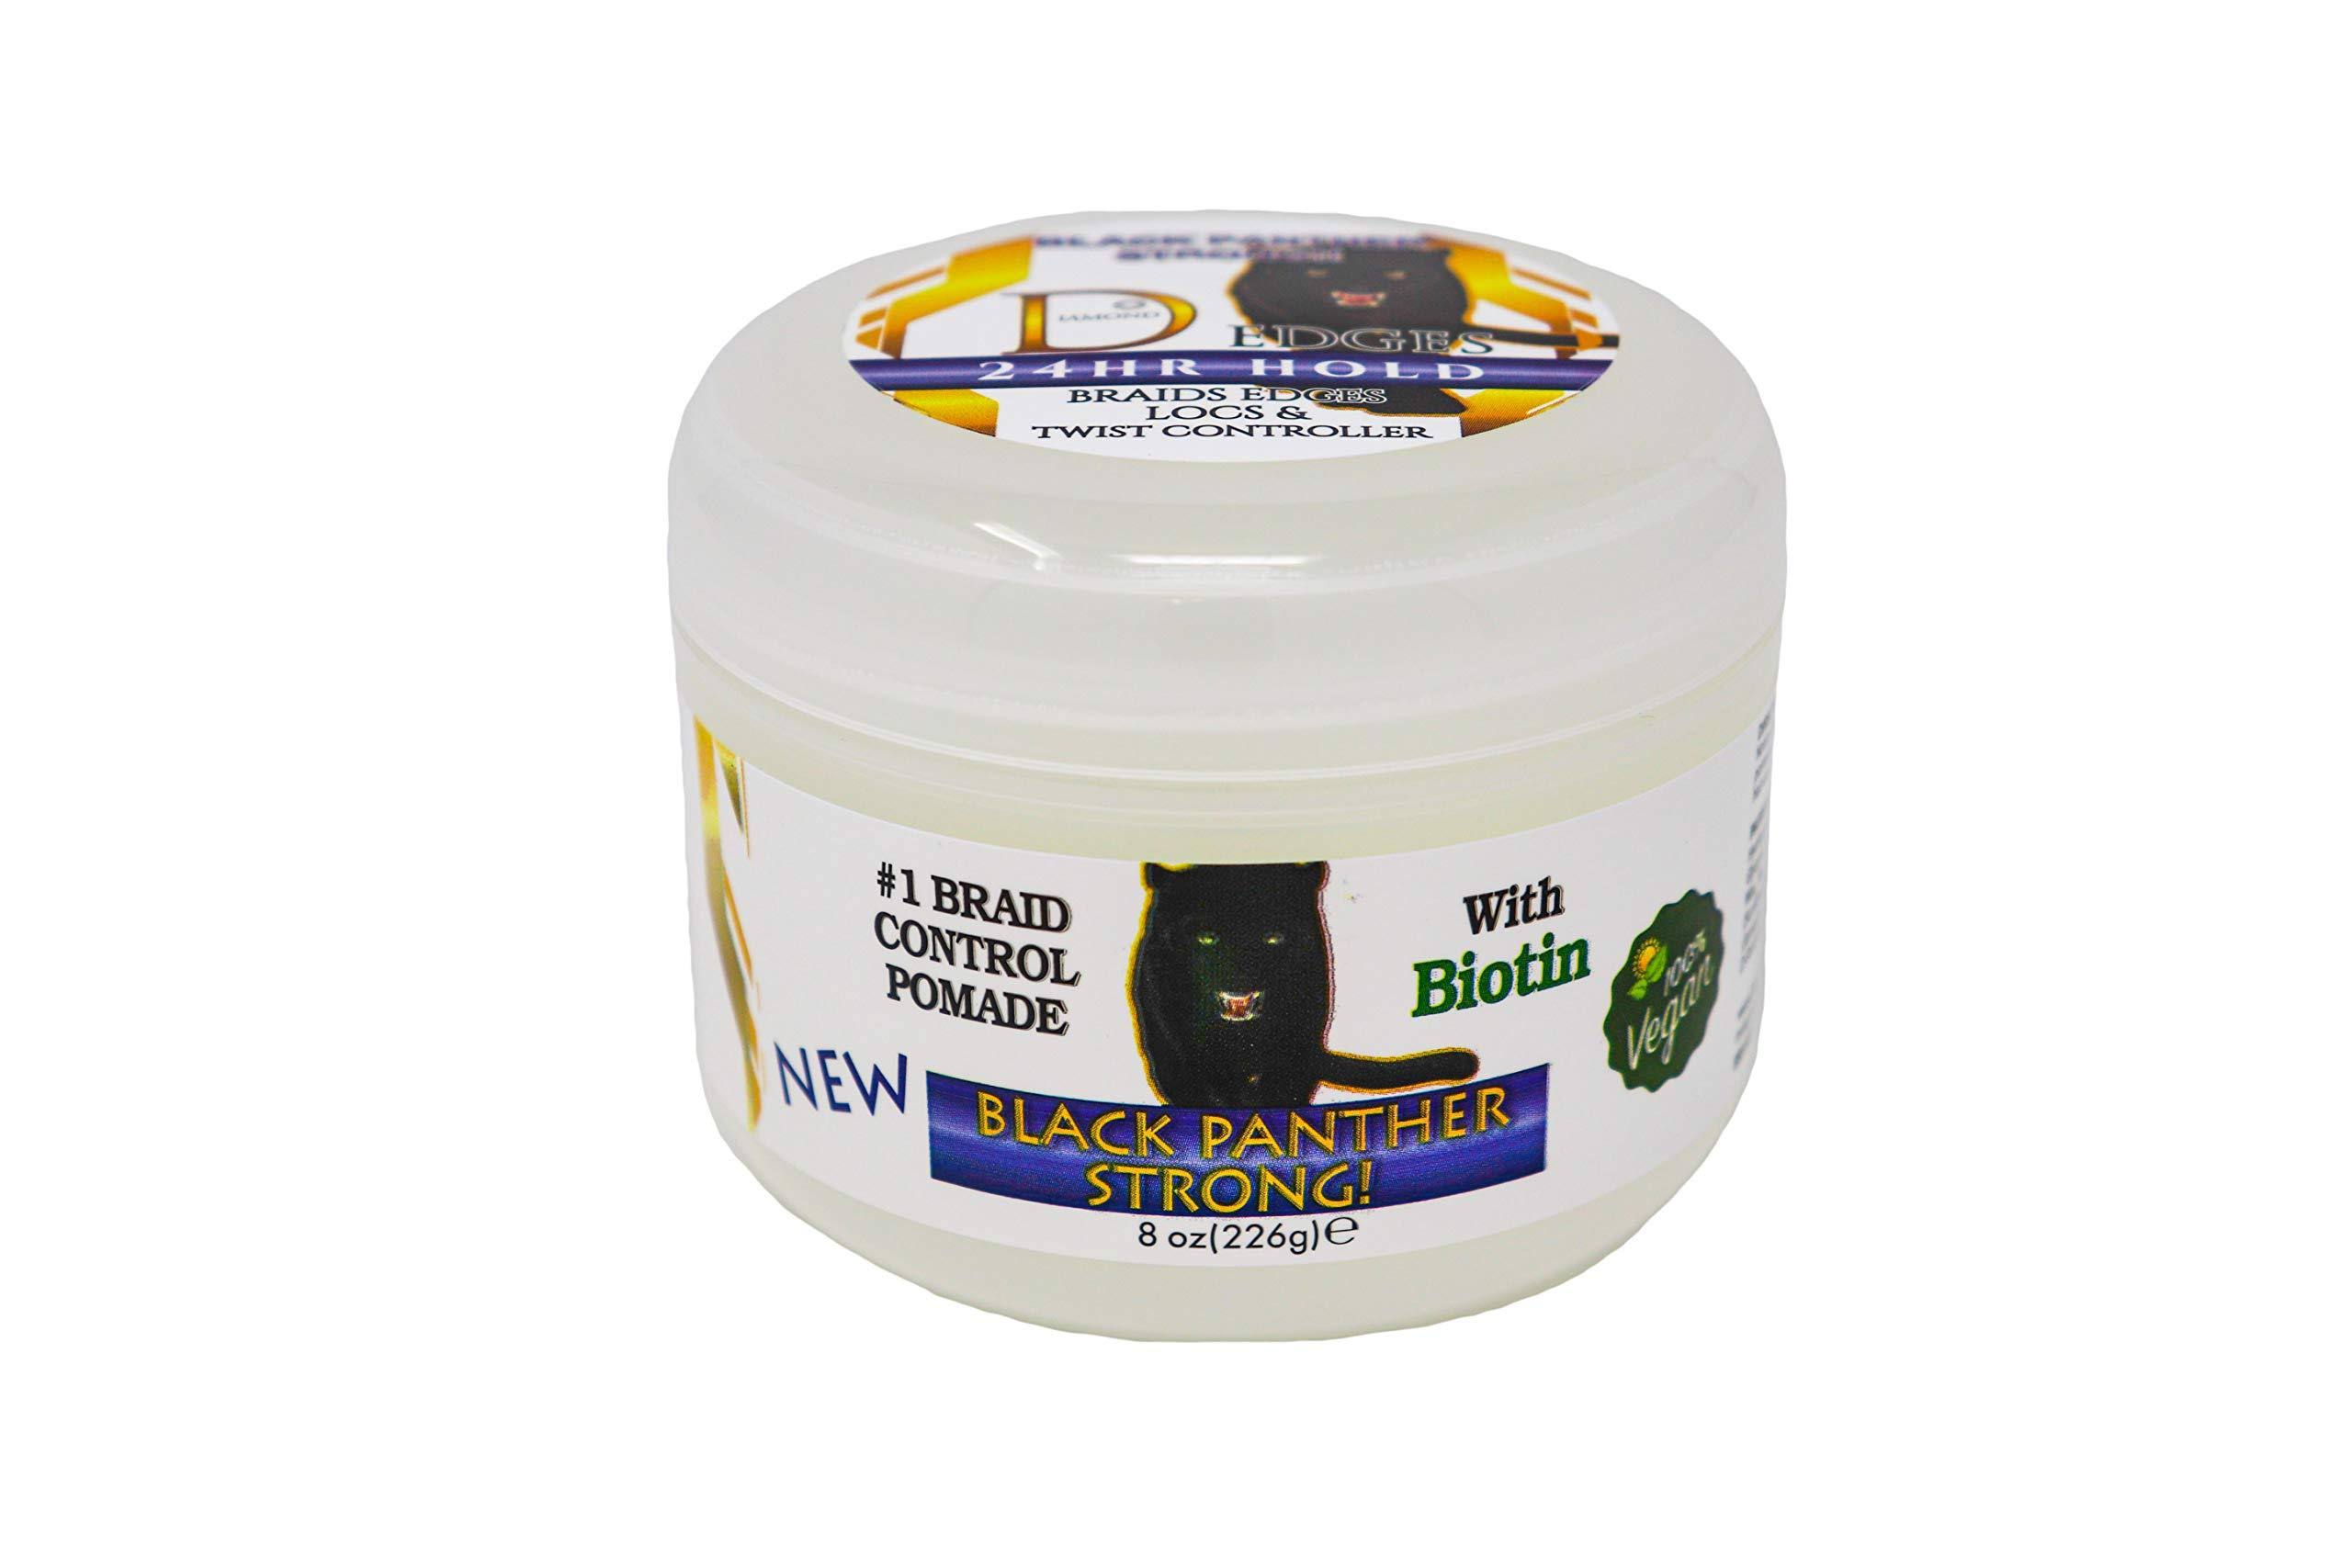 Black Panther Strong - Vegan - Edge and Braid Control Pomade 8 OZ. Sty